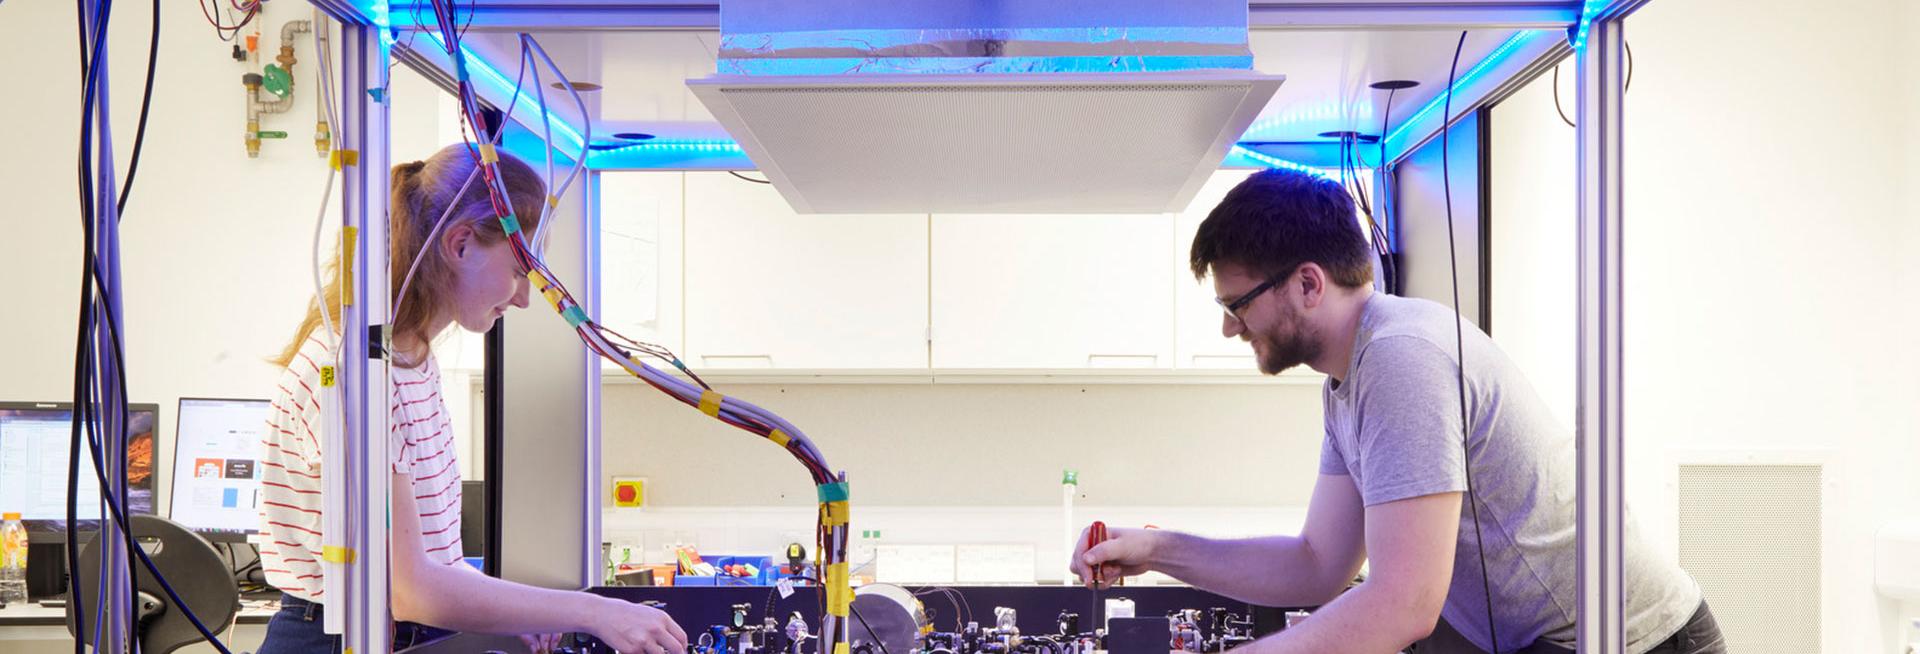 Two research scientists over a laser table